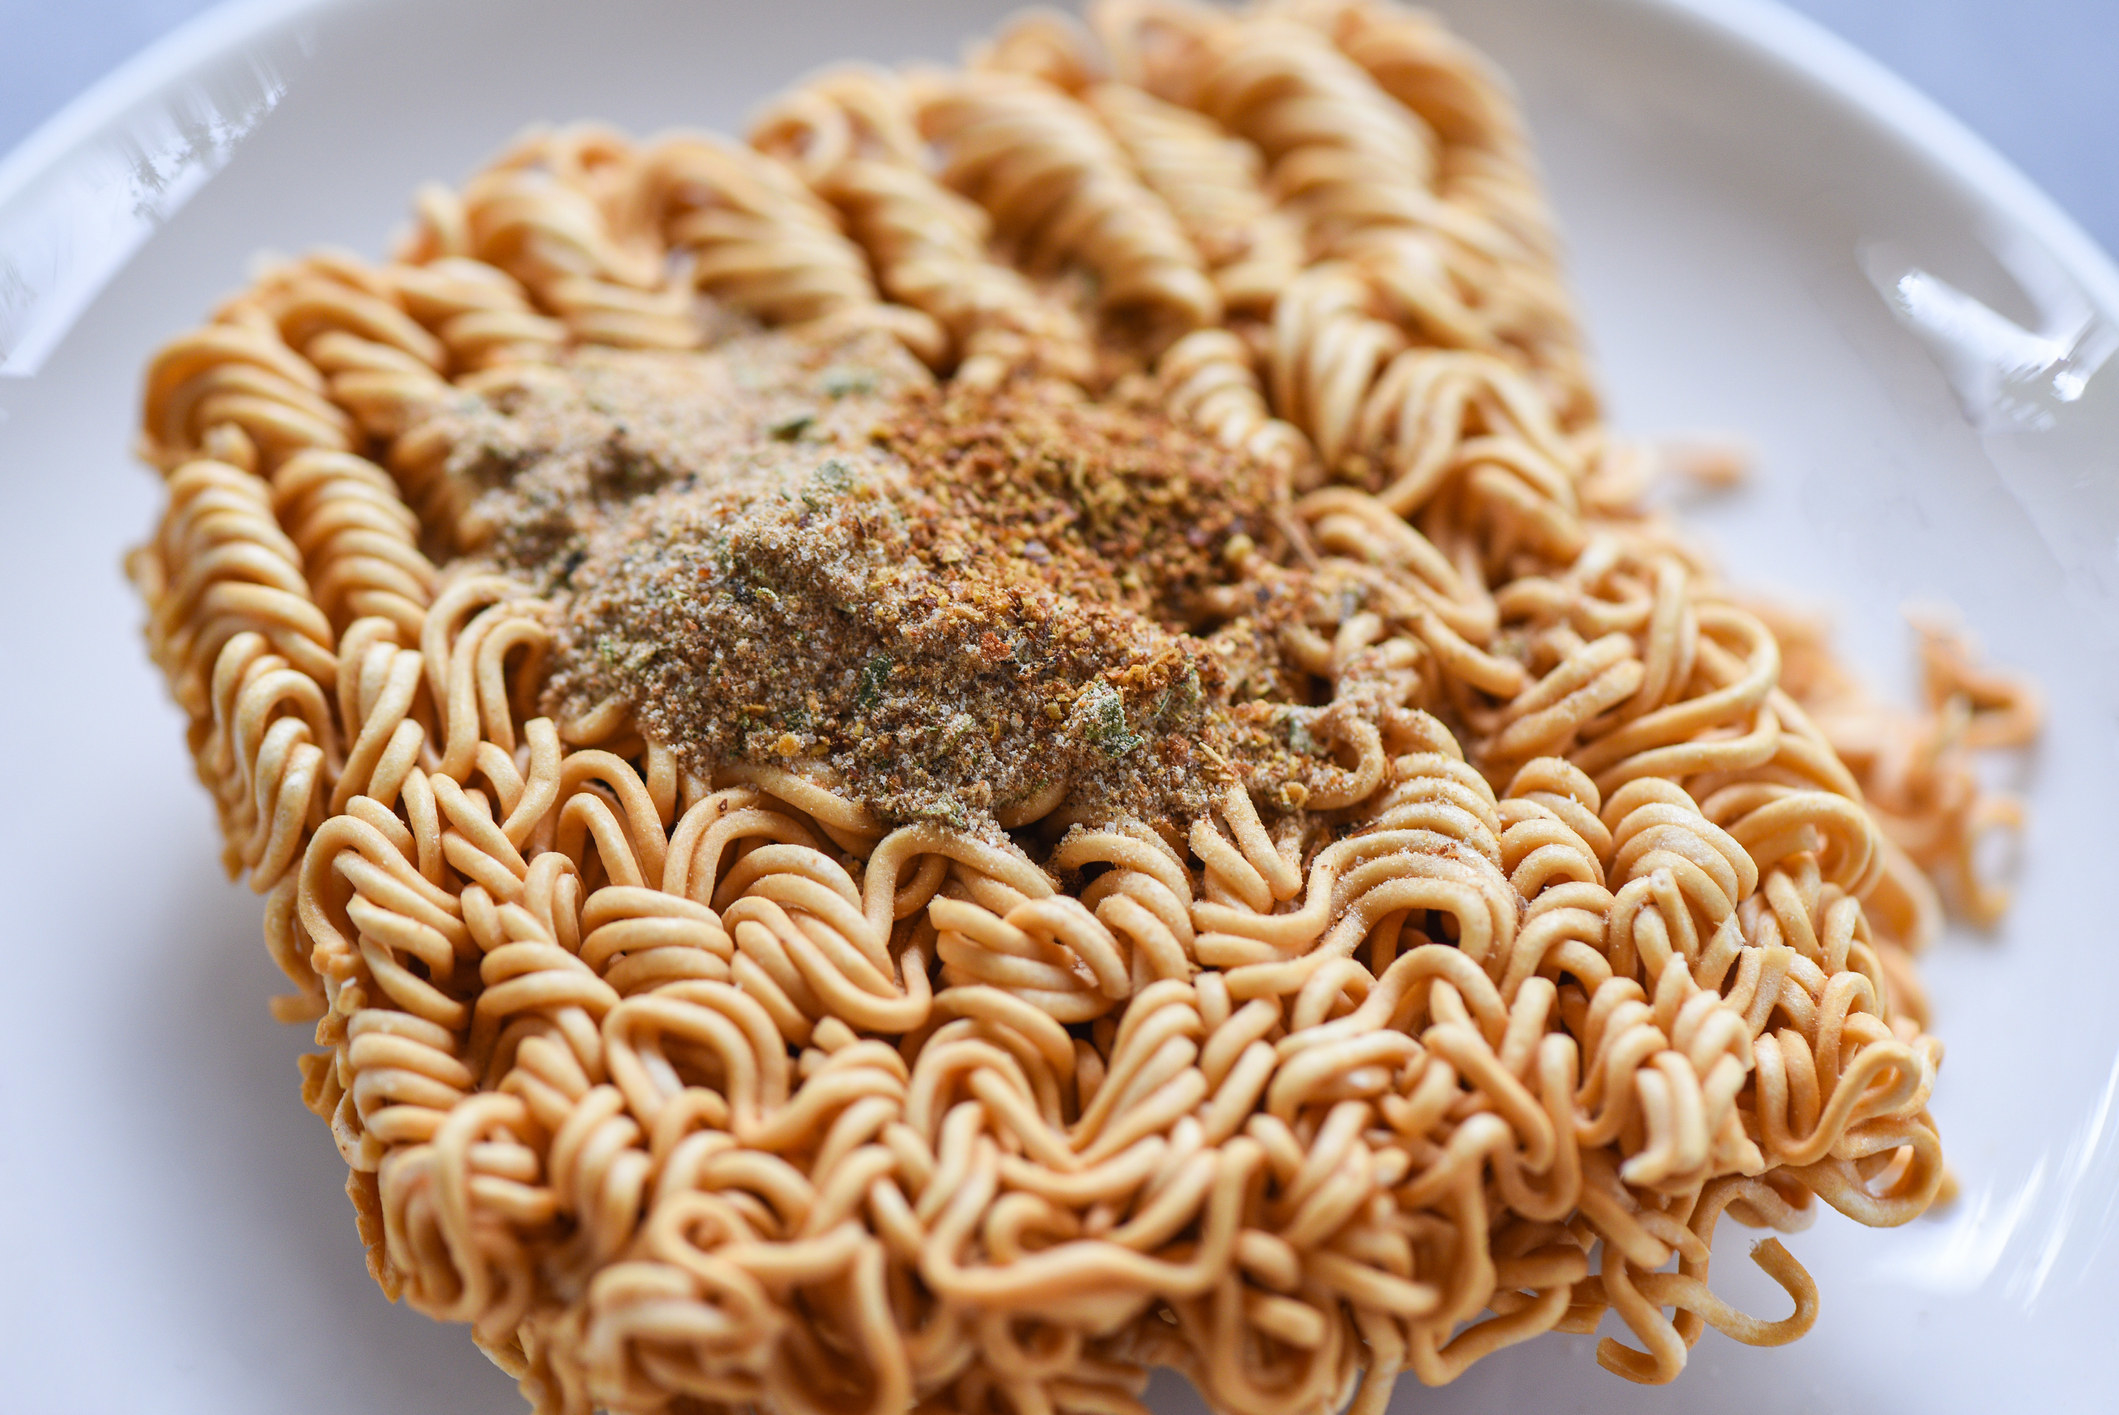 Packed ramen noodles with MSG seasoning.